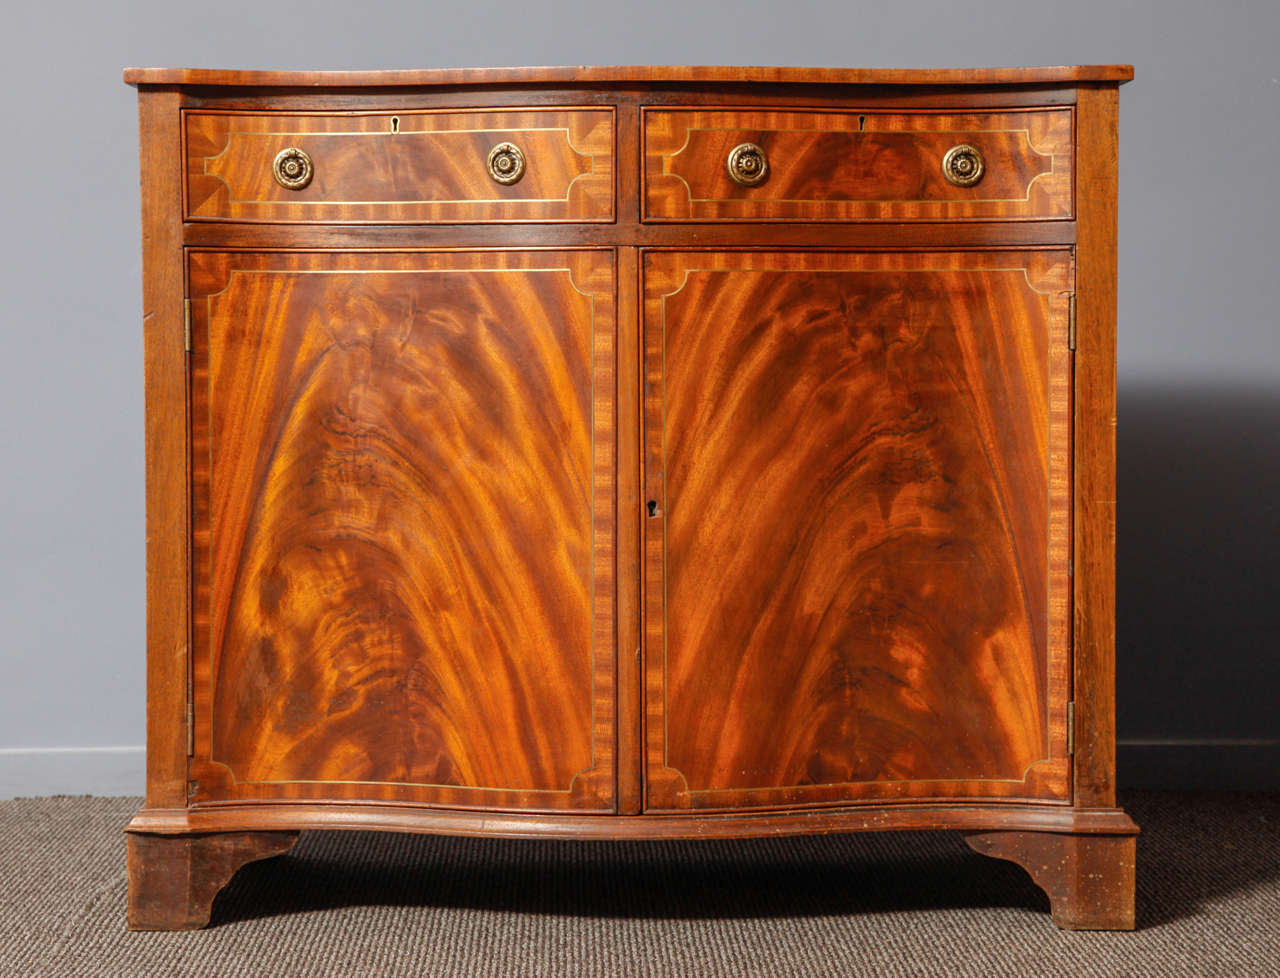 A very pretty two doors mahogany buffet from the early 20th century.
The original finish is in a perfect condition.